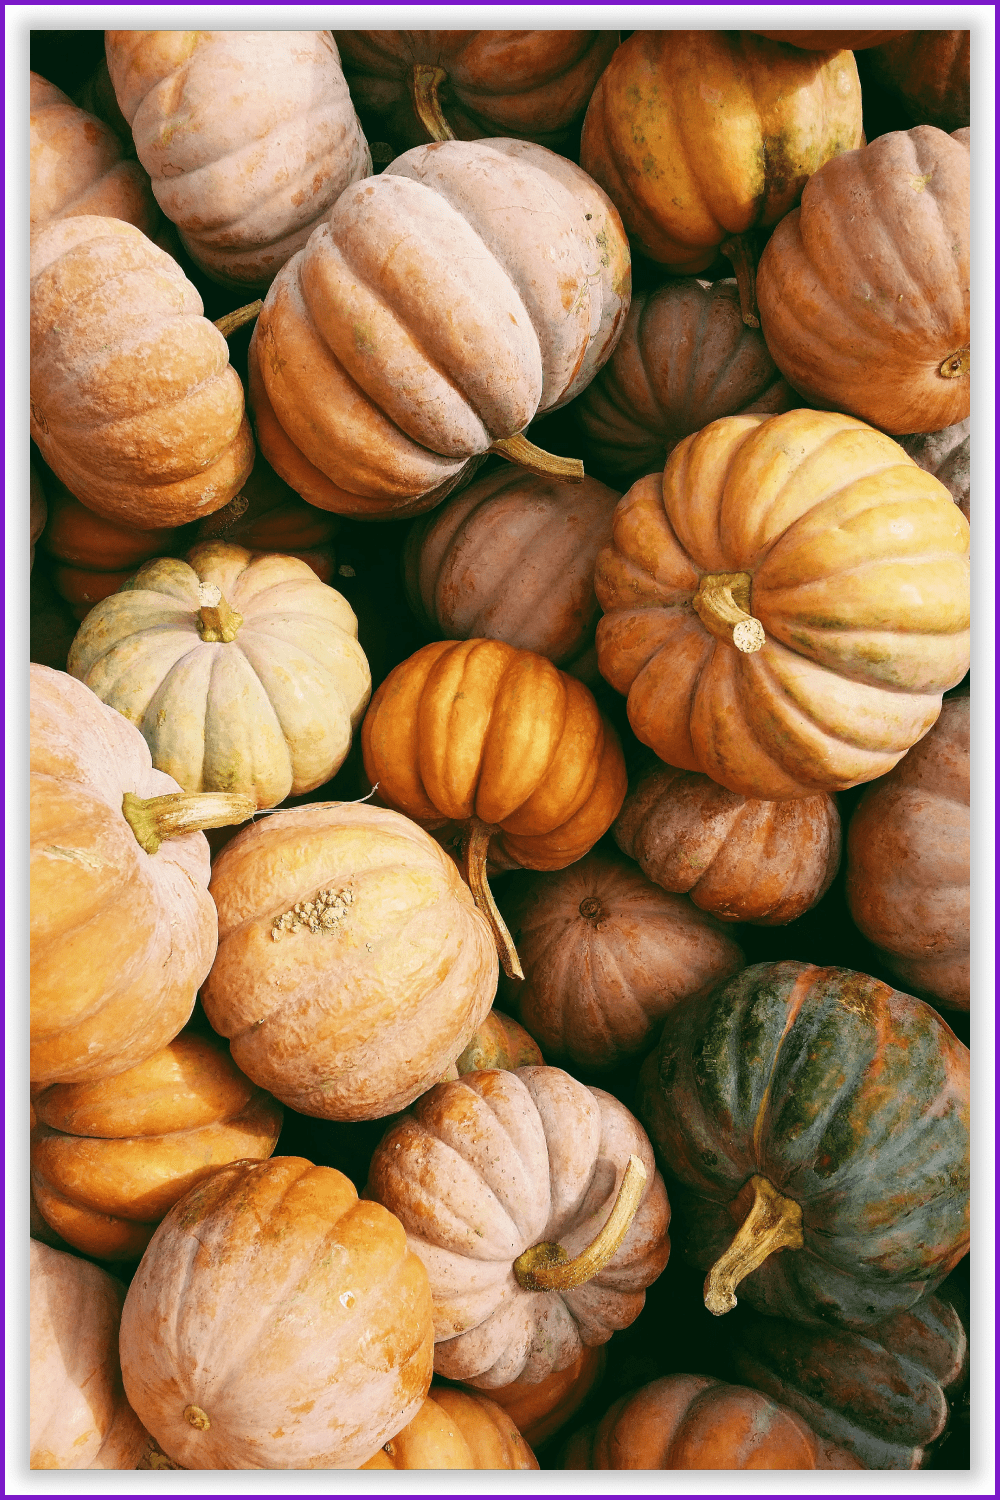 Photo of a pile of ripe pumpkins.